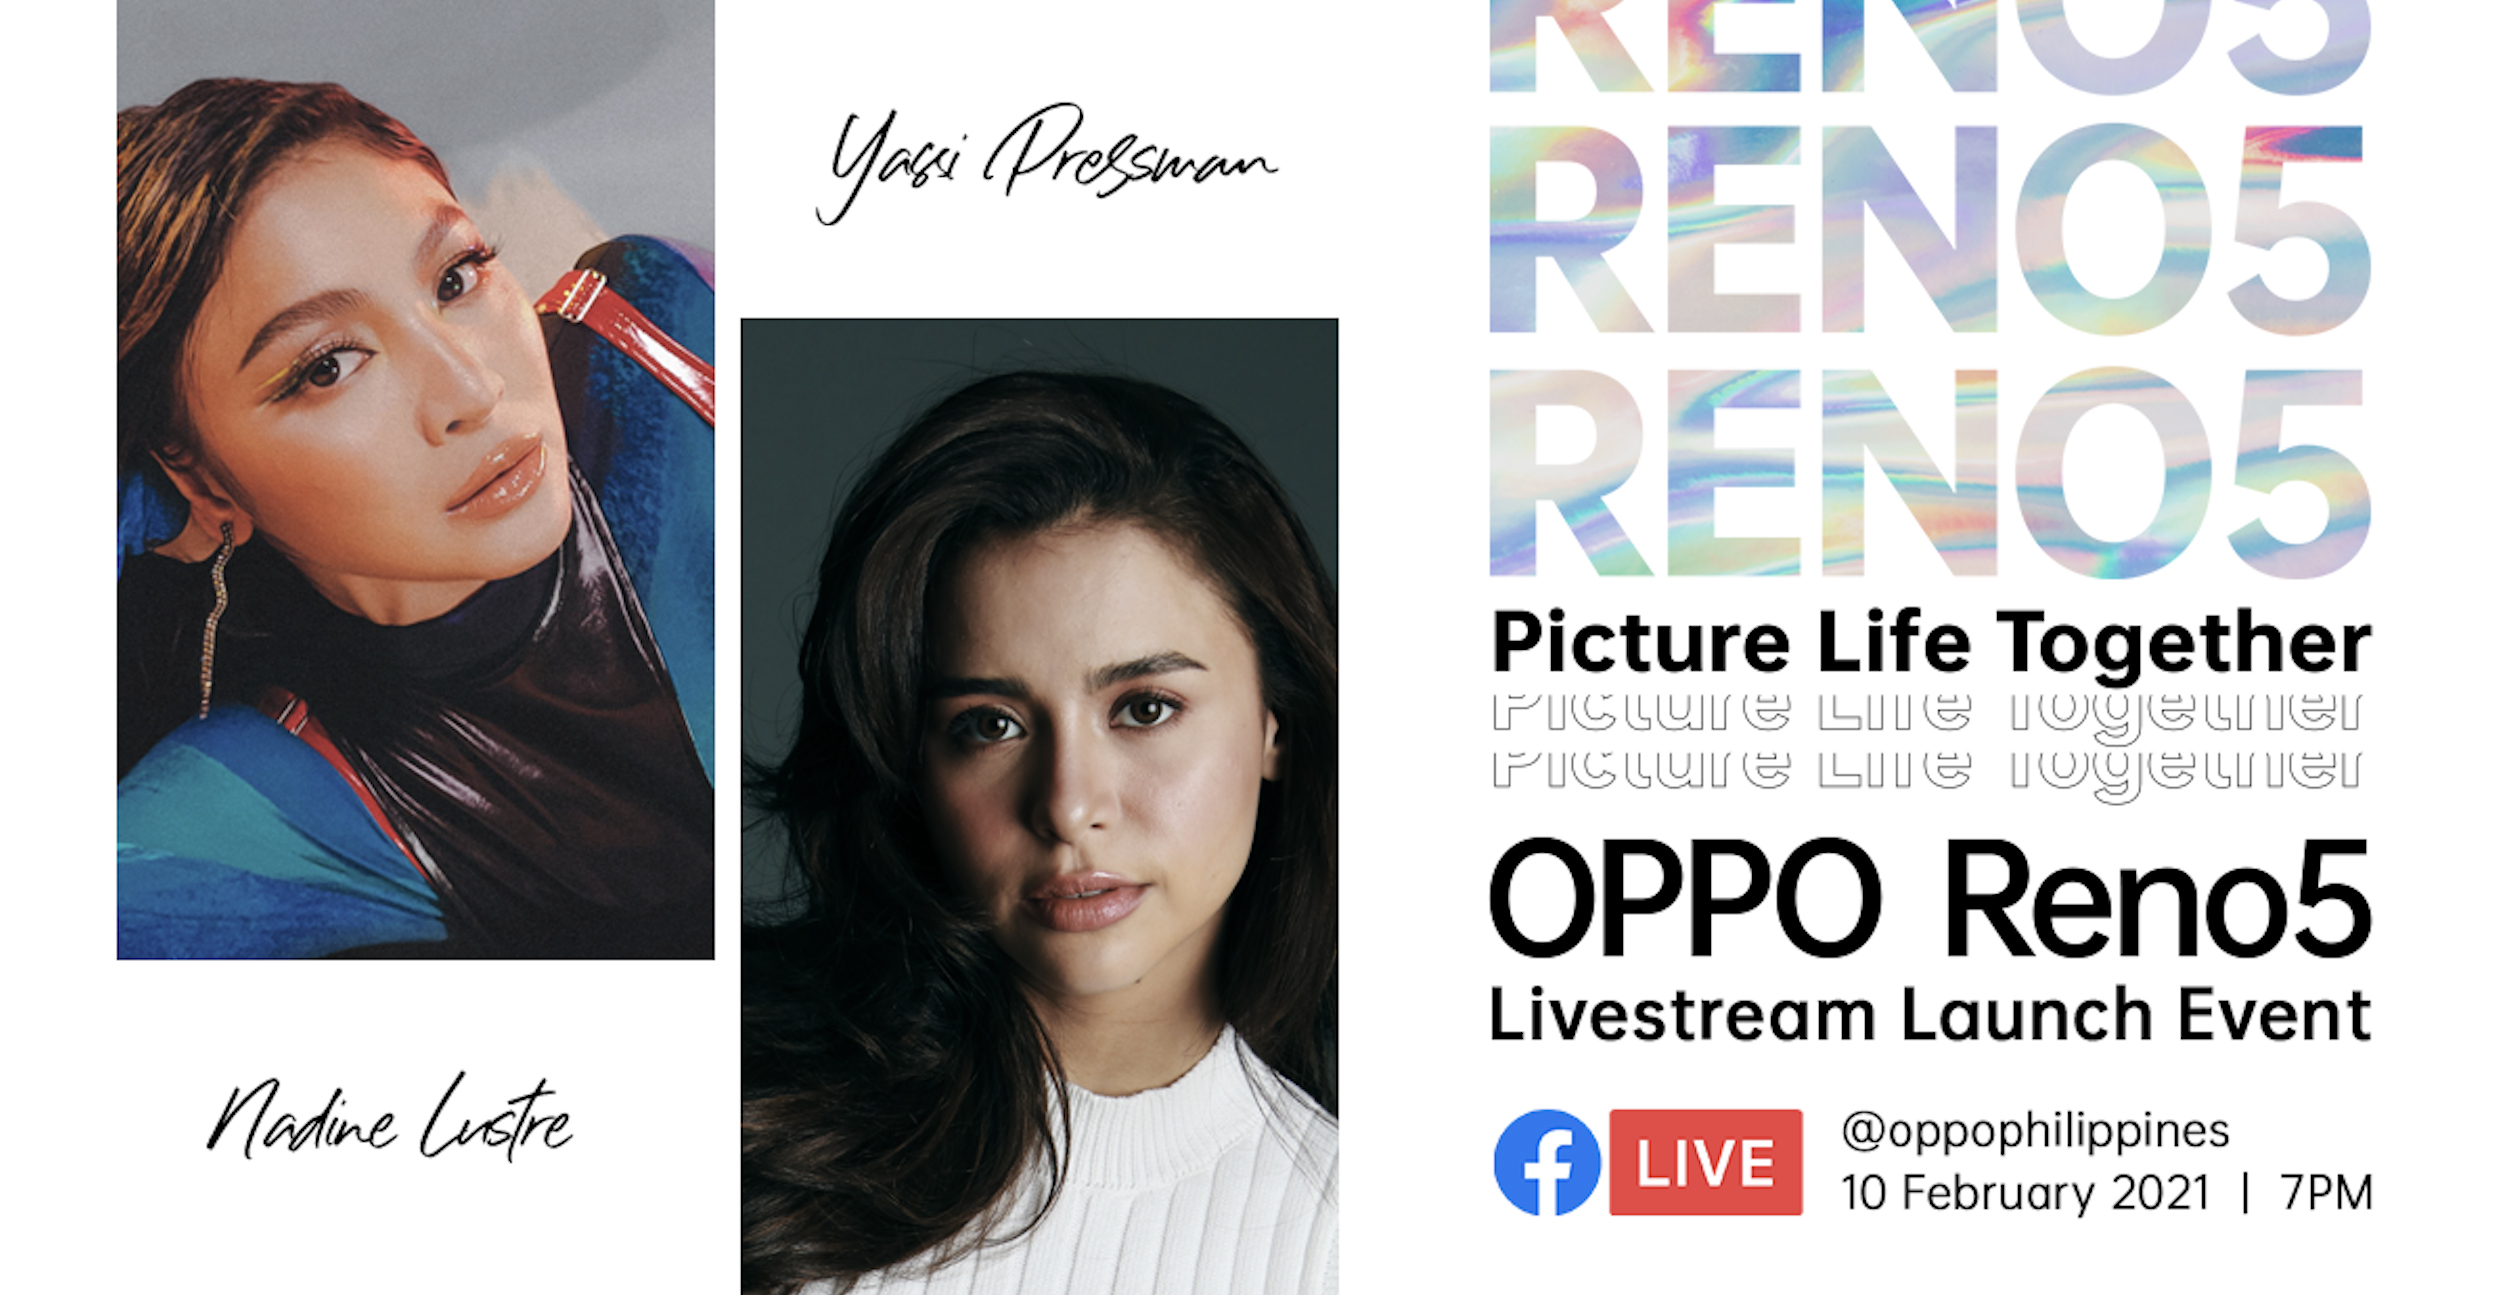 OPPO Reno5 set to launch live on February 10